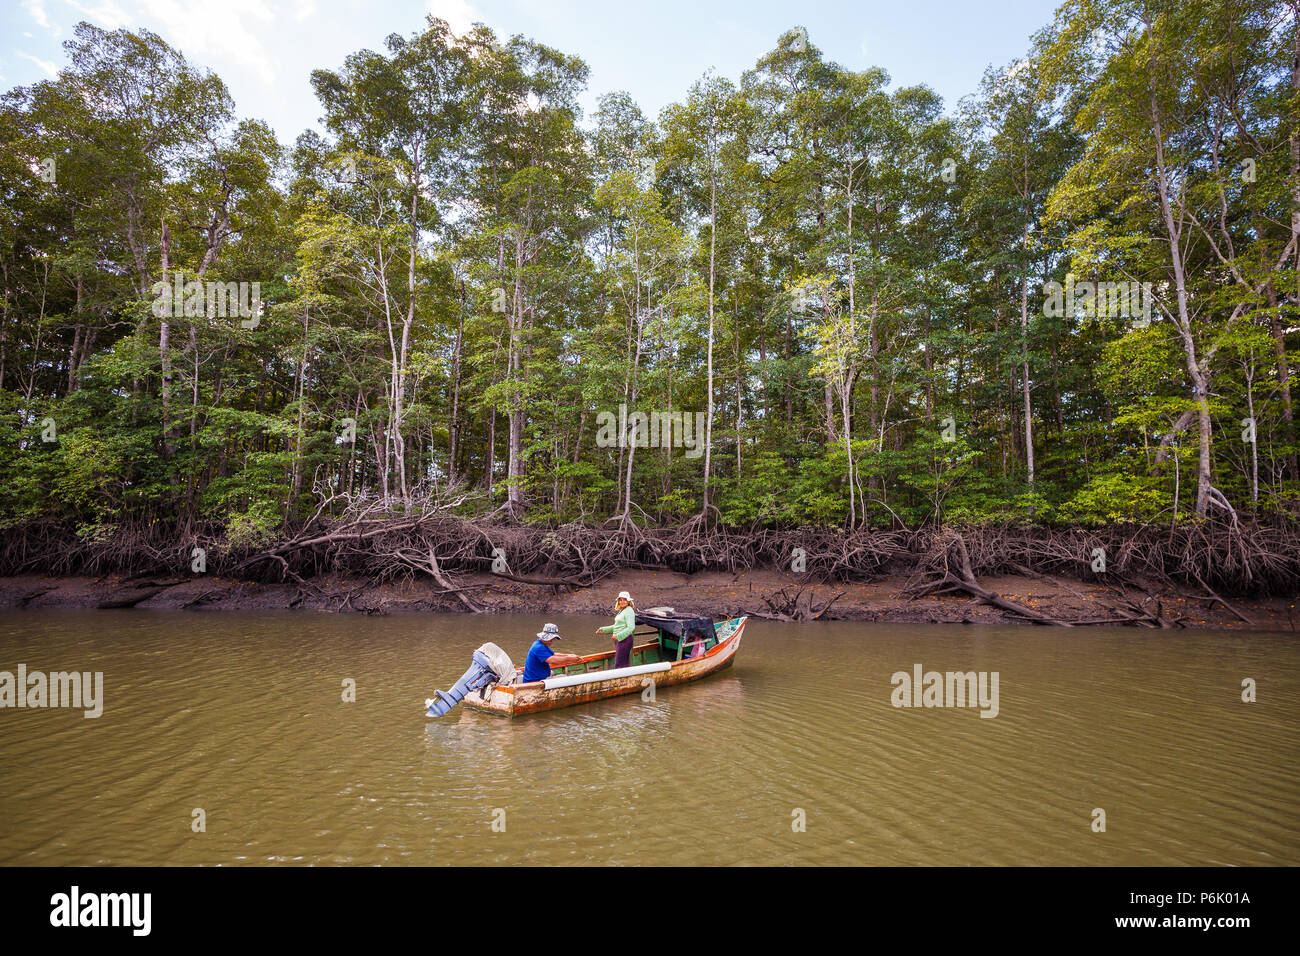 Panamanian man and woman fishing at the outlet of a river in Golfo de Montijo, Pacific coast, Veraguas province, Republic of Panama, Central America. Stock Photo